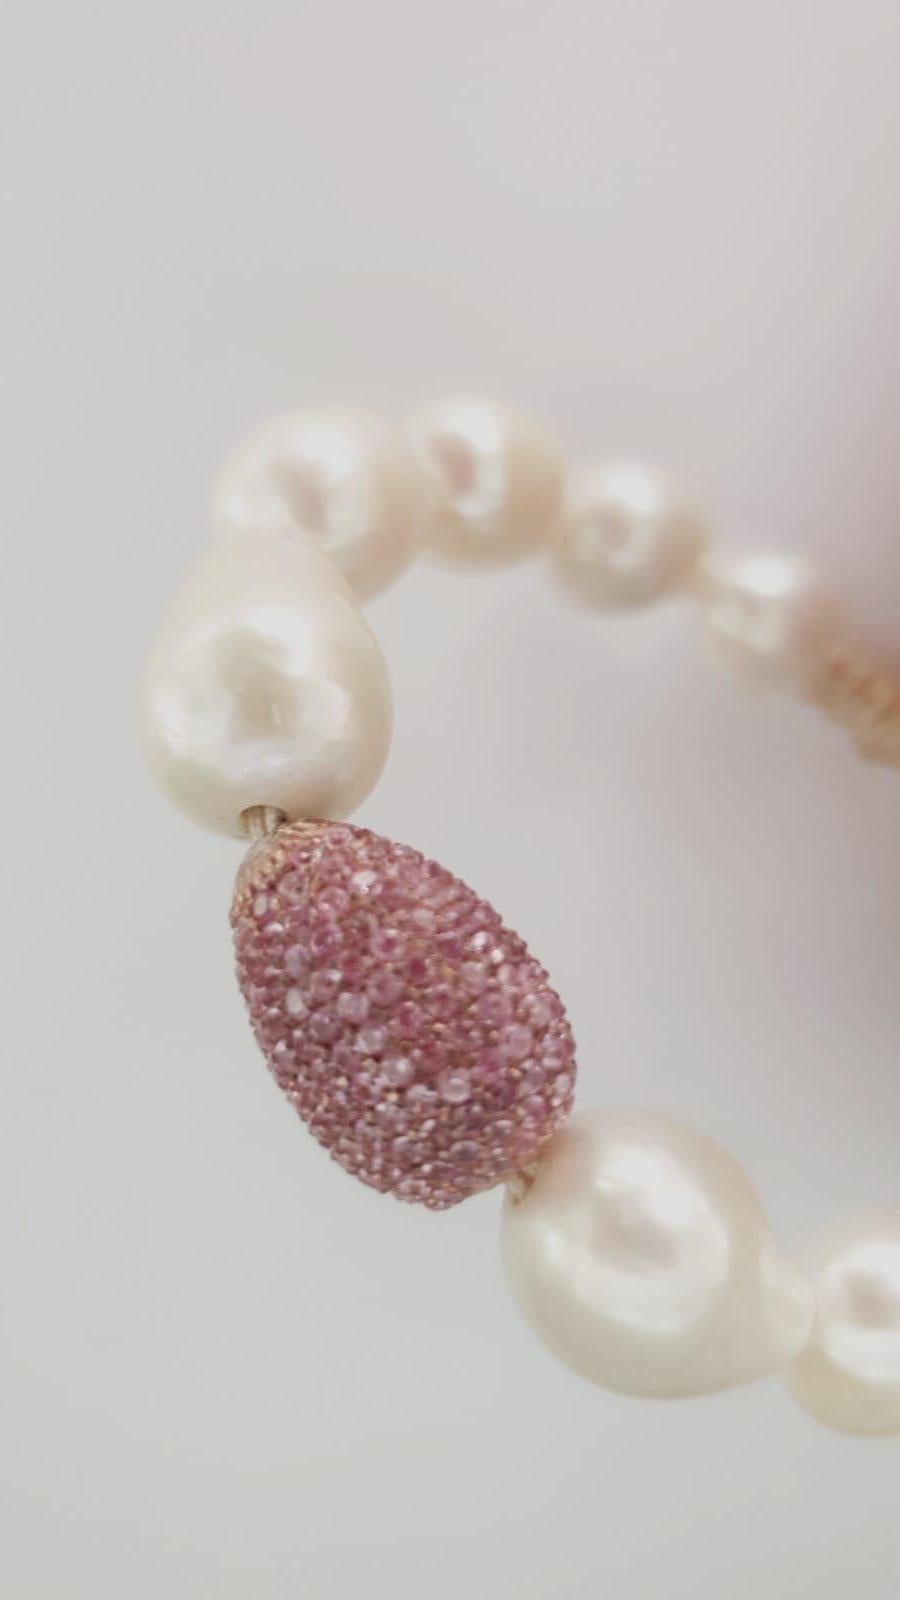 Nice bracelet made up of  pink sapphires pave on silver setting, baroque white pearls and macrame clasp. 
Pink sapphires pave ct. 3,75
Baroque white pearls
macrame clasp system
Total diameter cm 7 - it fits well for a medium wrist ( about 15-16 cm) 